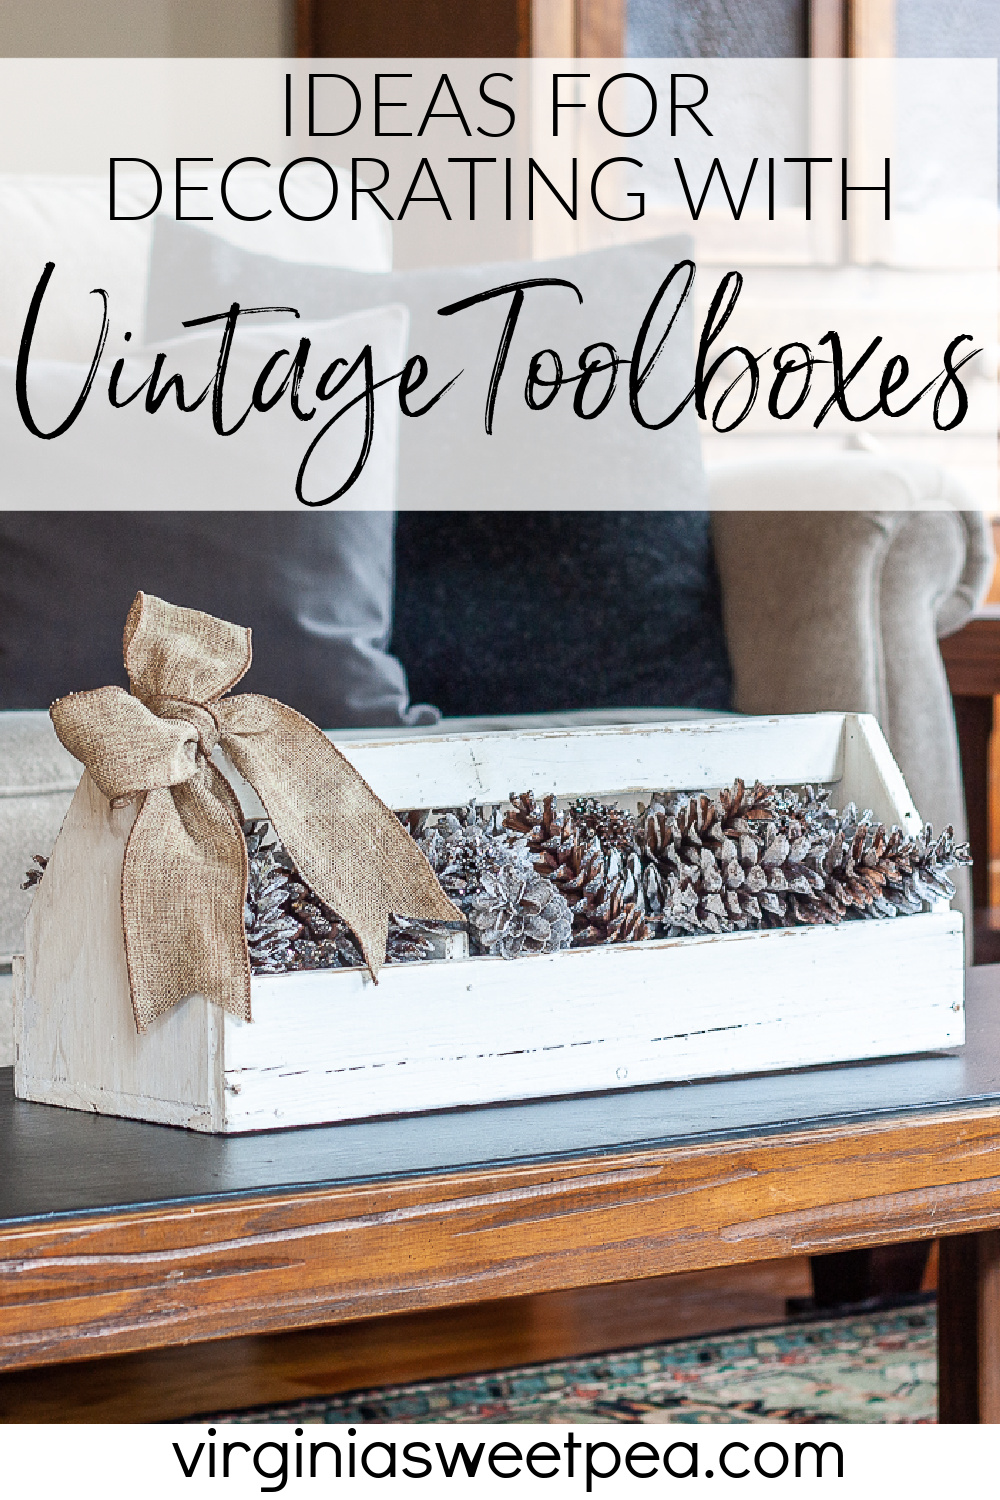 https://www.virginiasweetpea.com/wp-content/uploads/2021/01/Ideas-for-Decorating-with-Vintage-Toolboxes.jpg